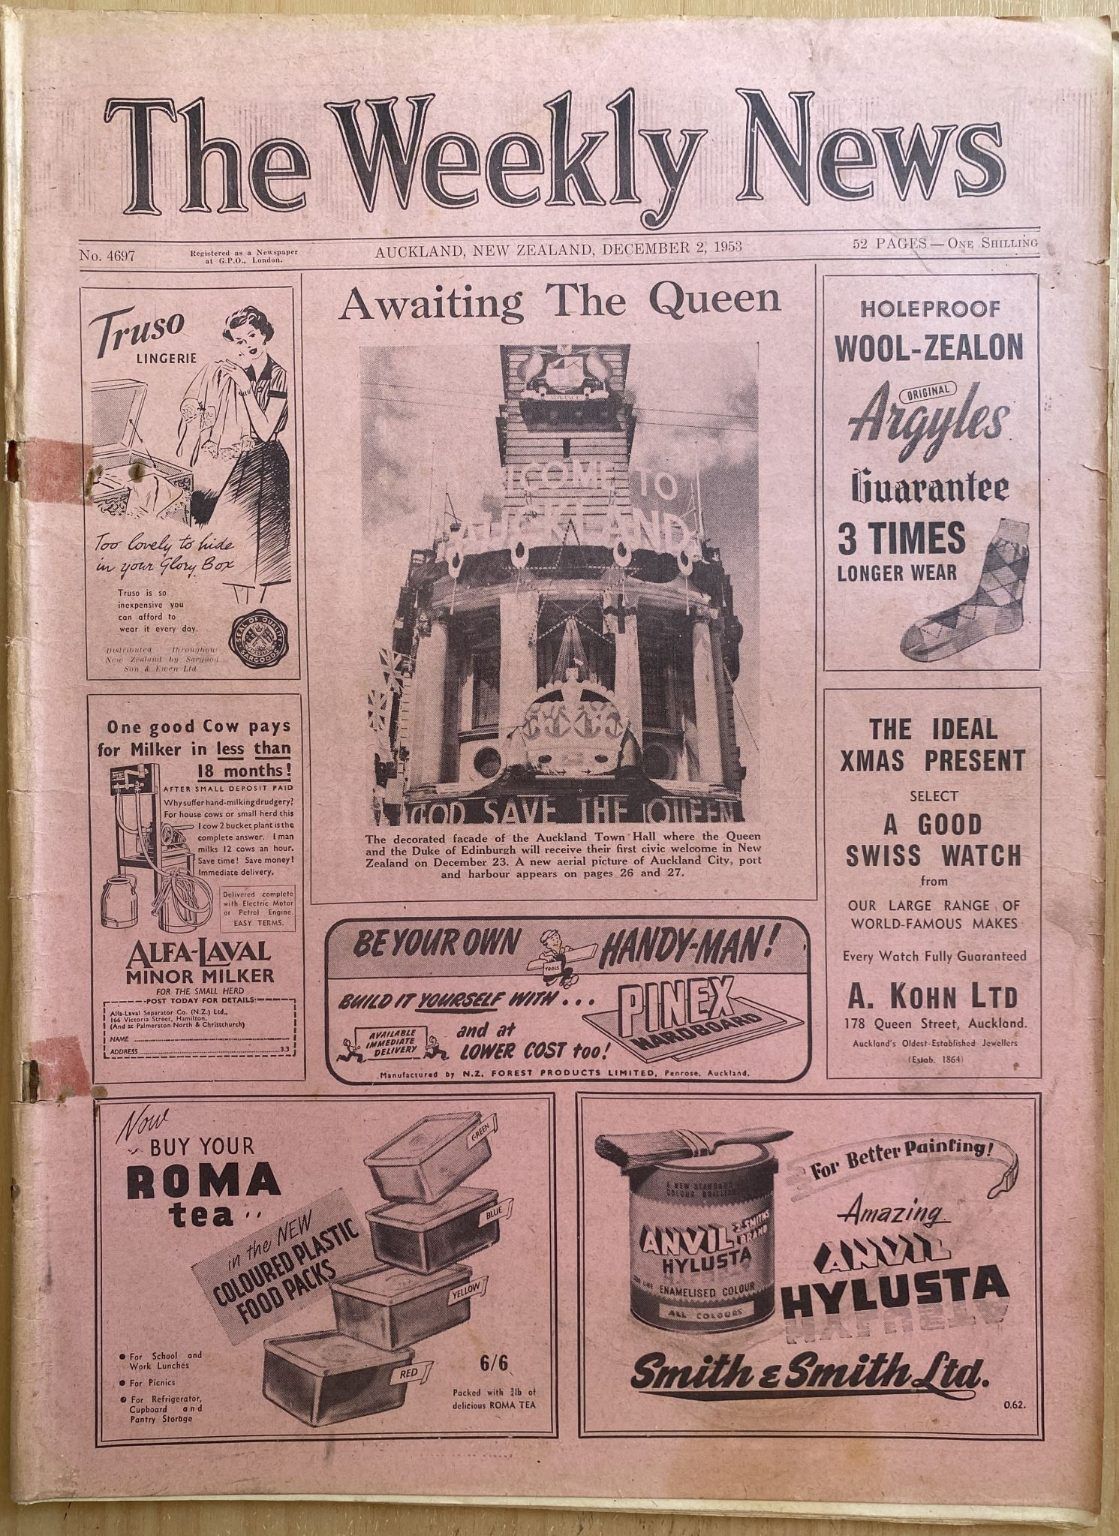 OLD NEWSPAPER: The Weekly News - No. 4697, 2 December 1953